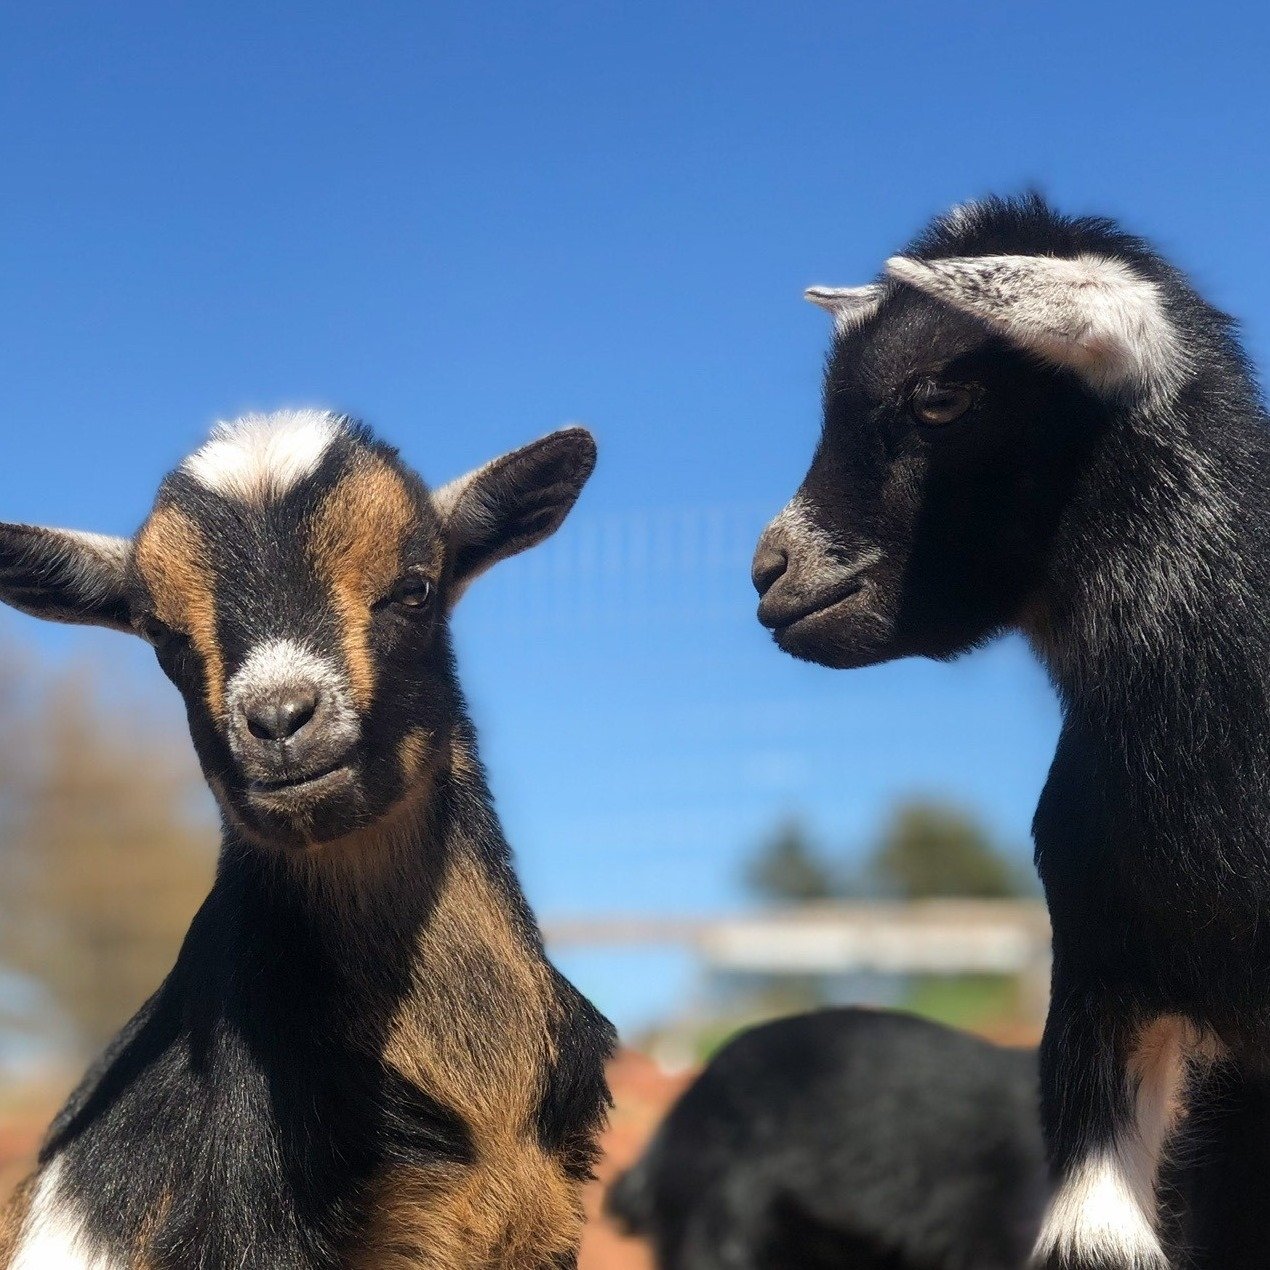 Dwarf goats looking at one another under blue sky at Alexander & Darlene Farm Haven